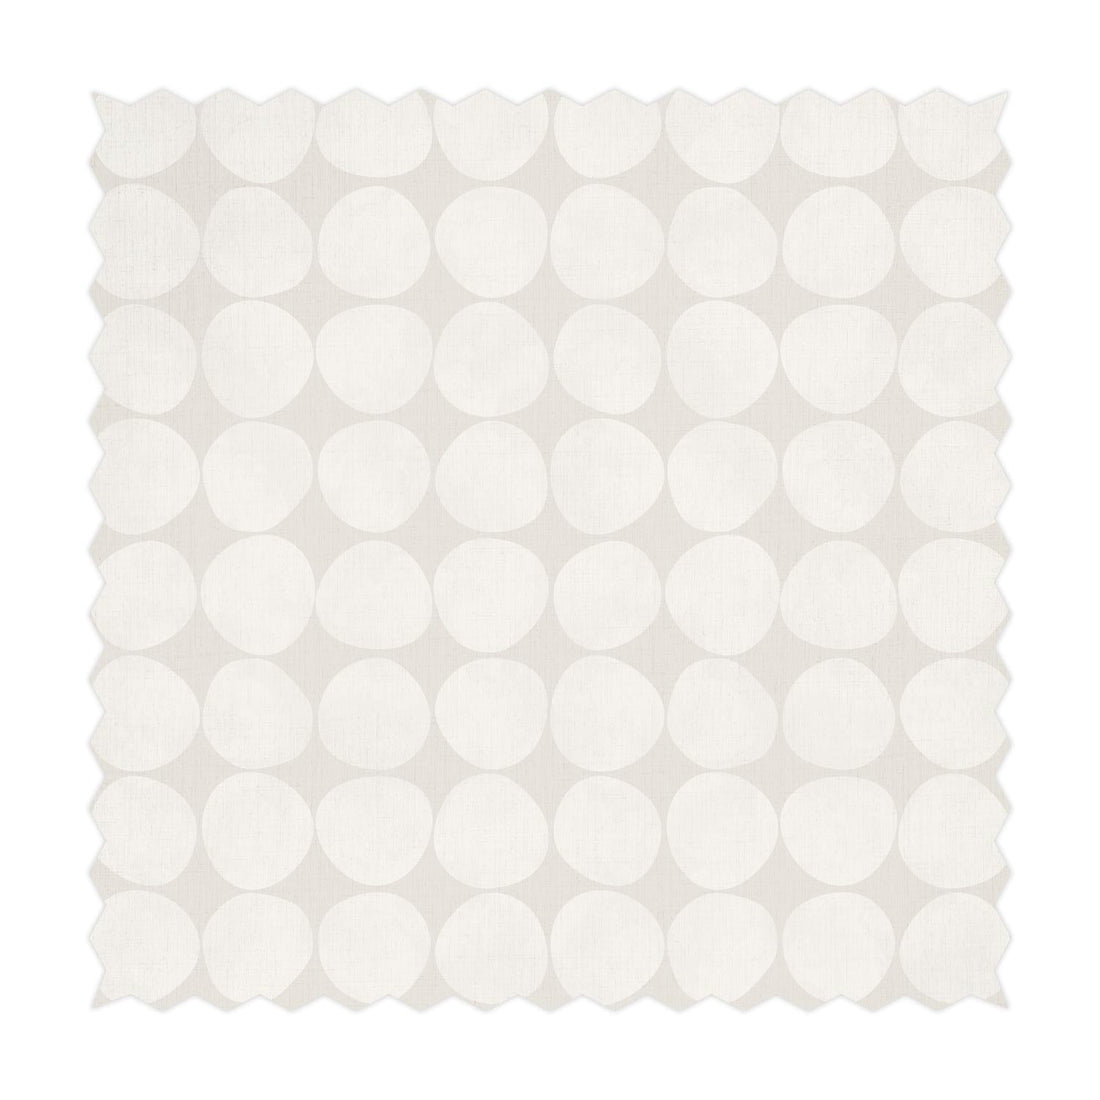 tiny circle print fabric design in neutral shade